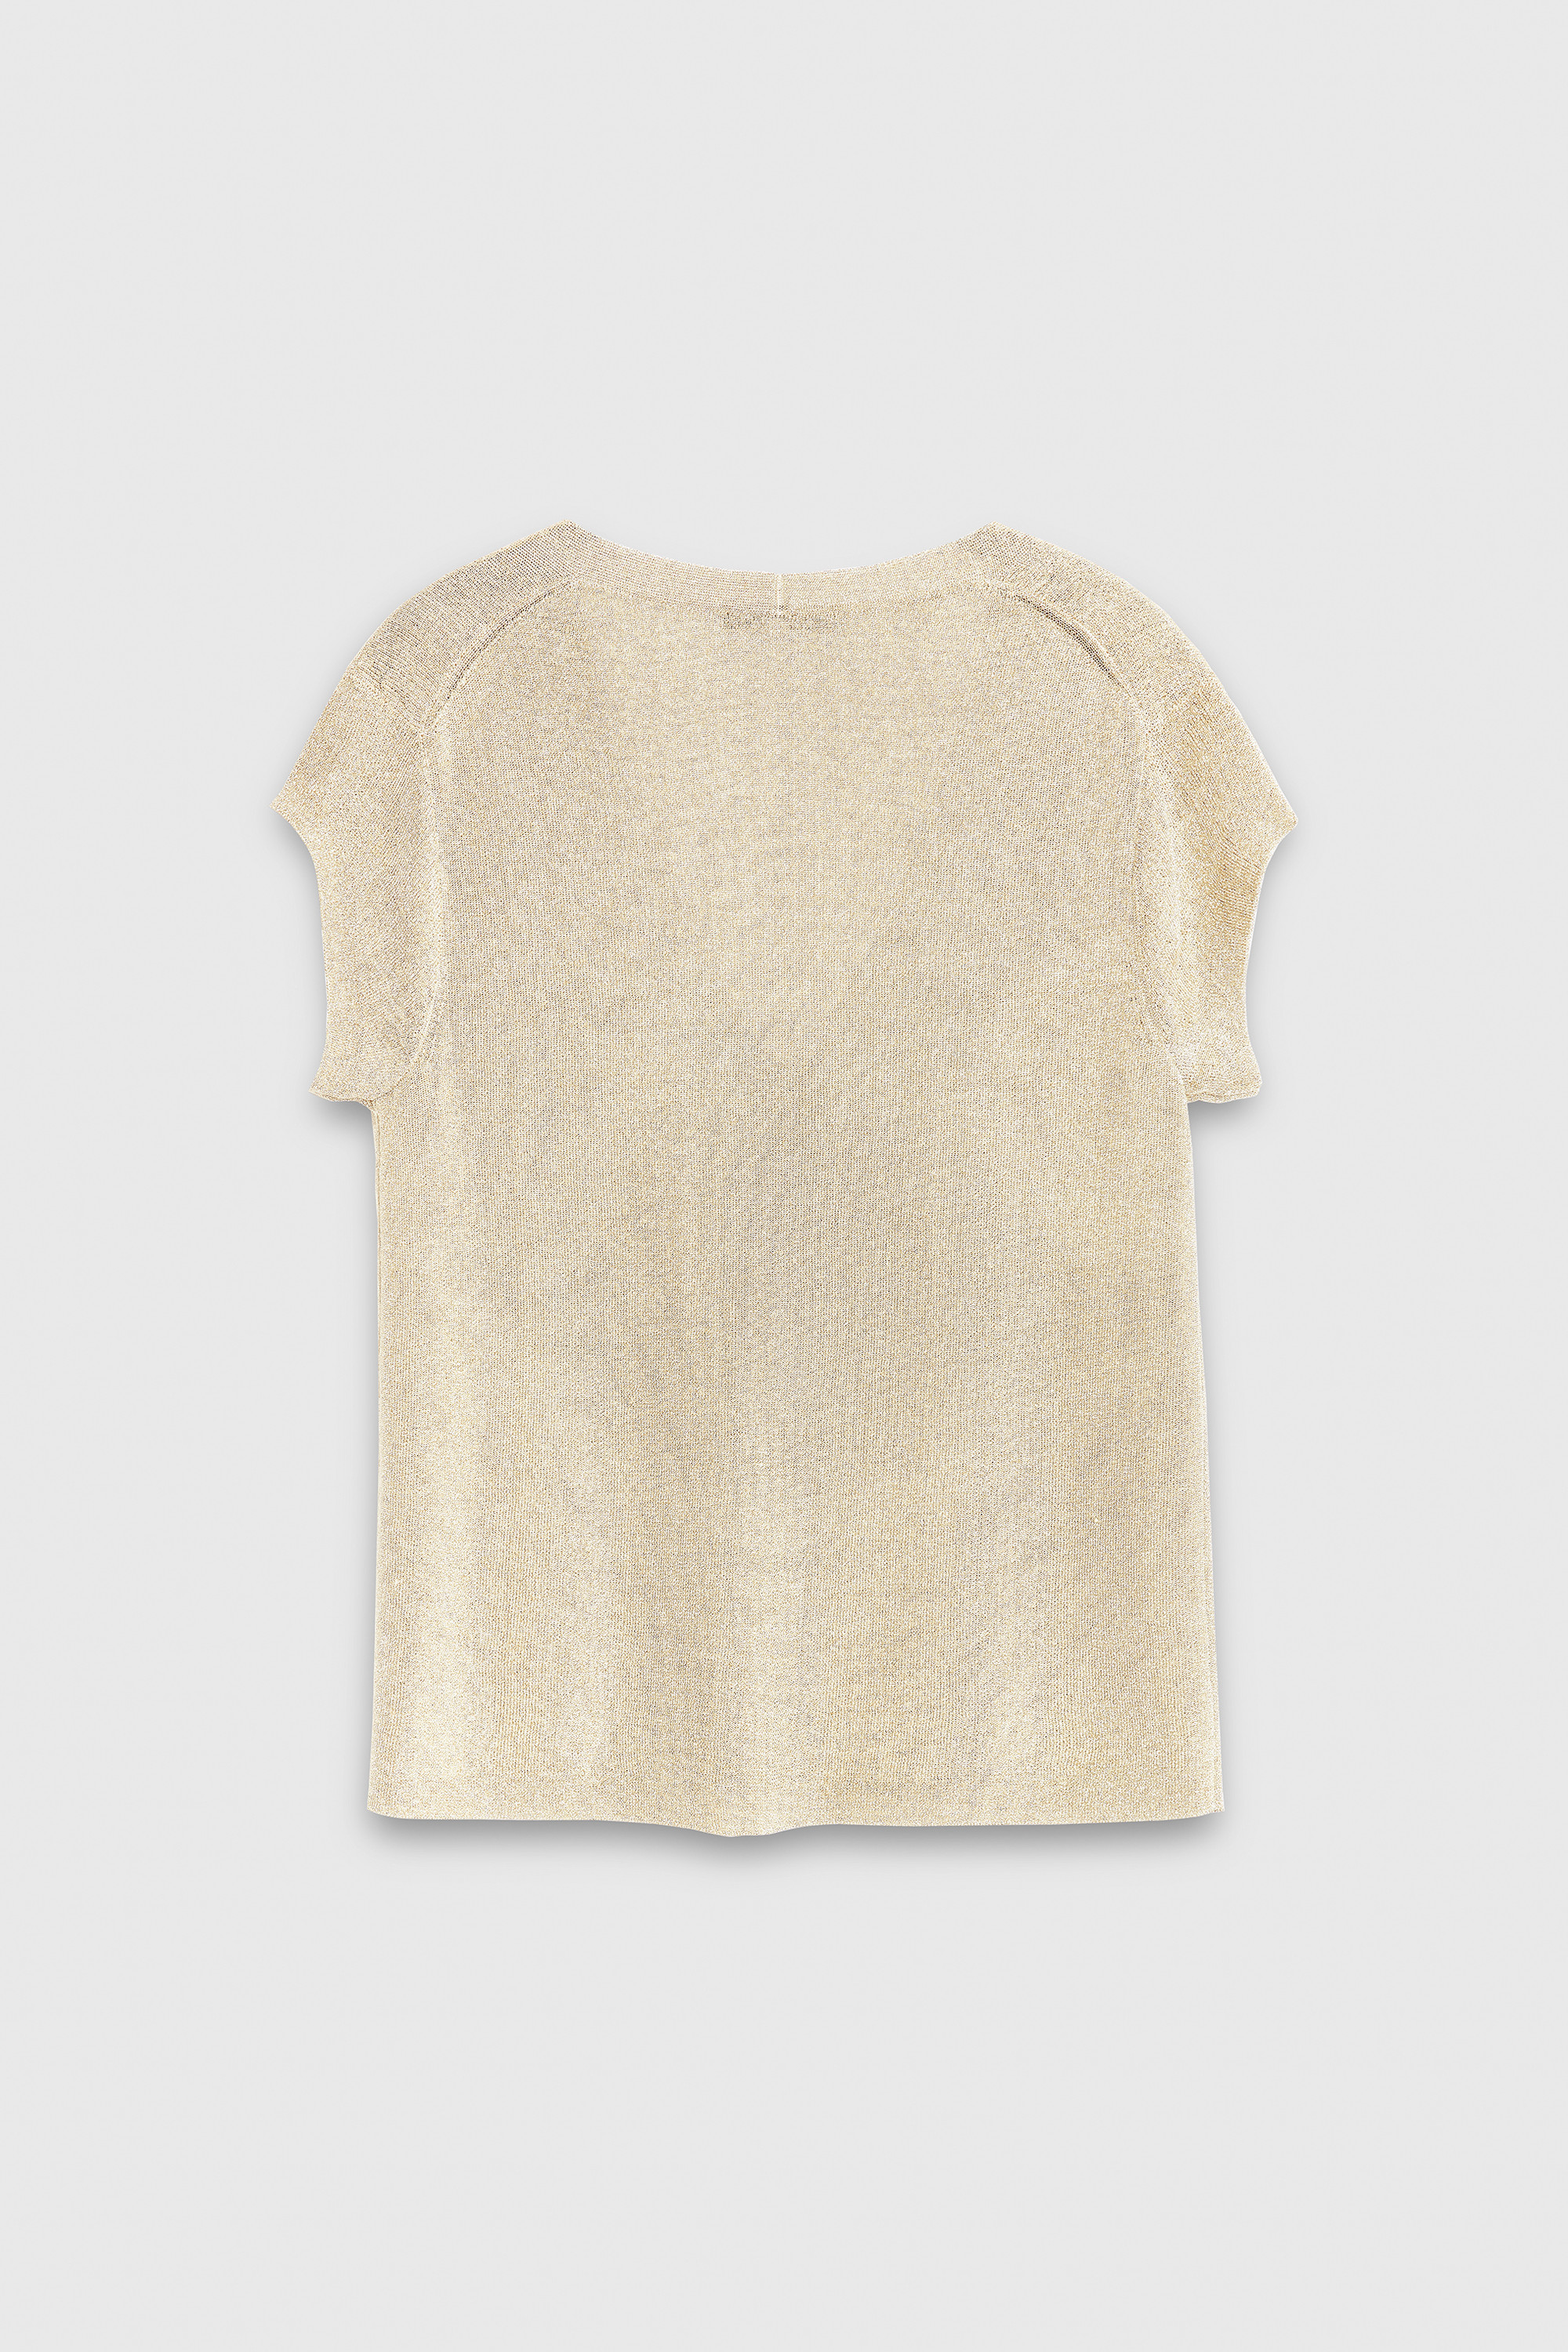 Lorne Knitted Top Gold - Welcome to the Fold LTD